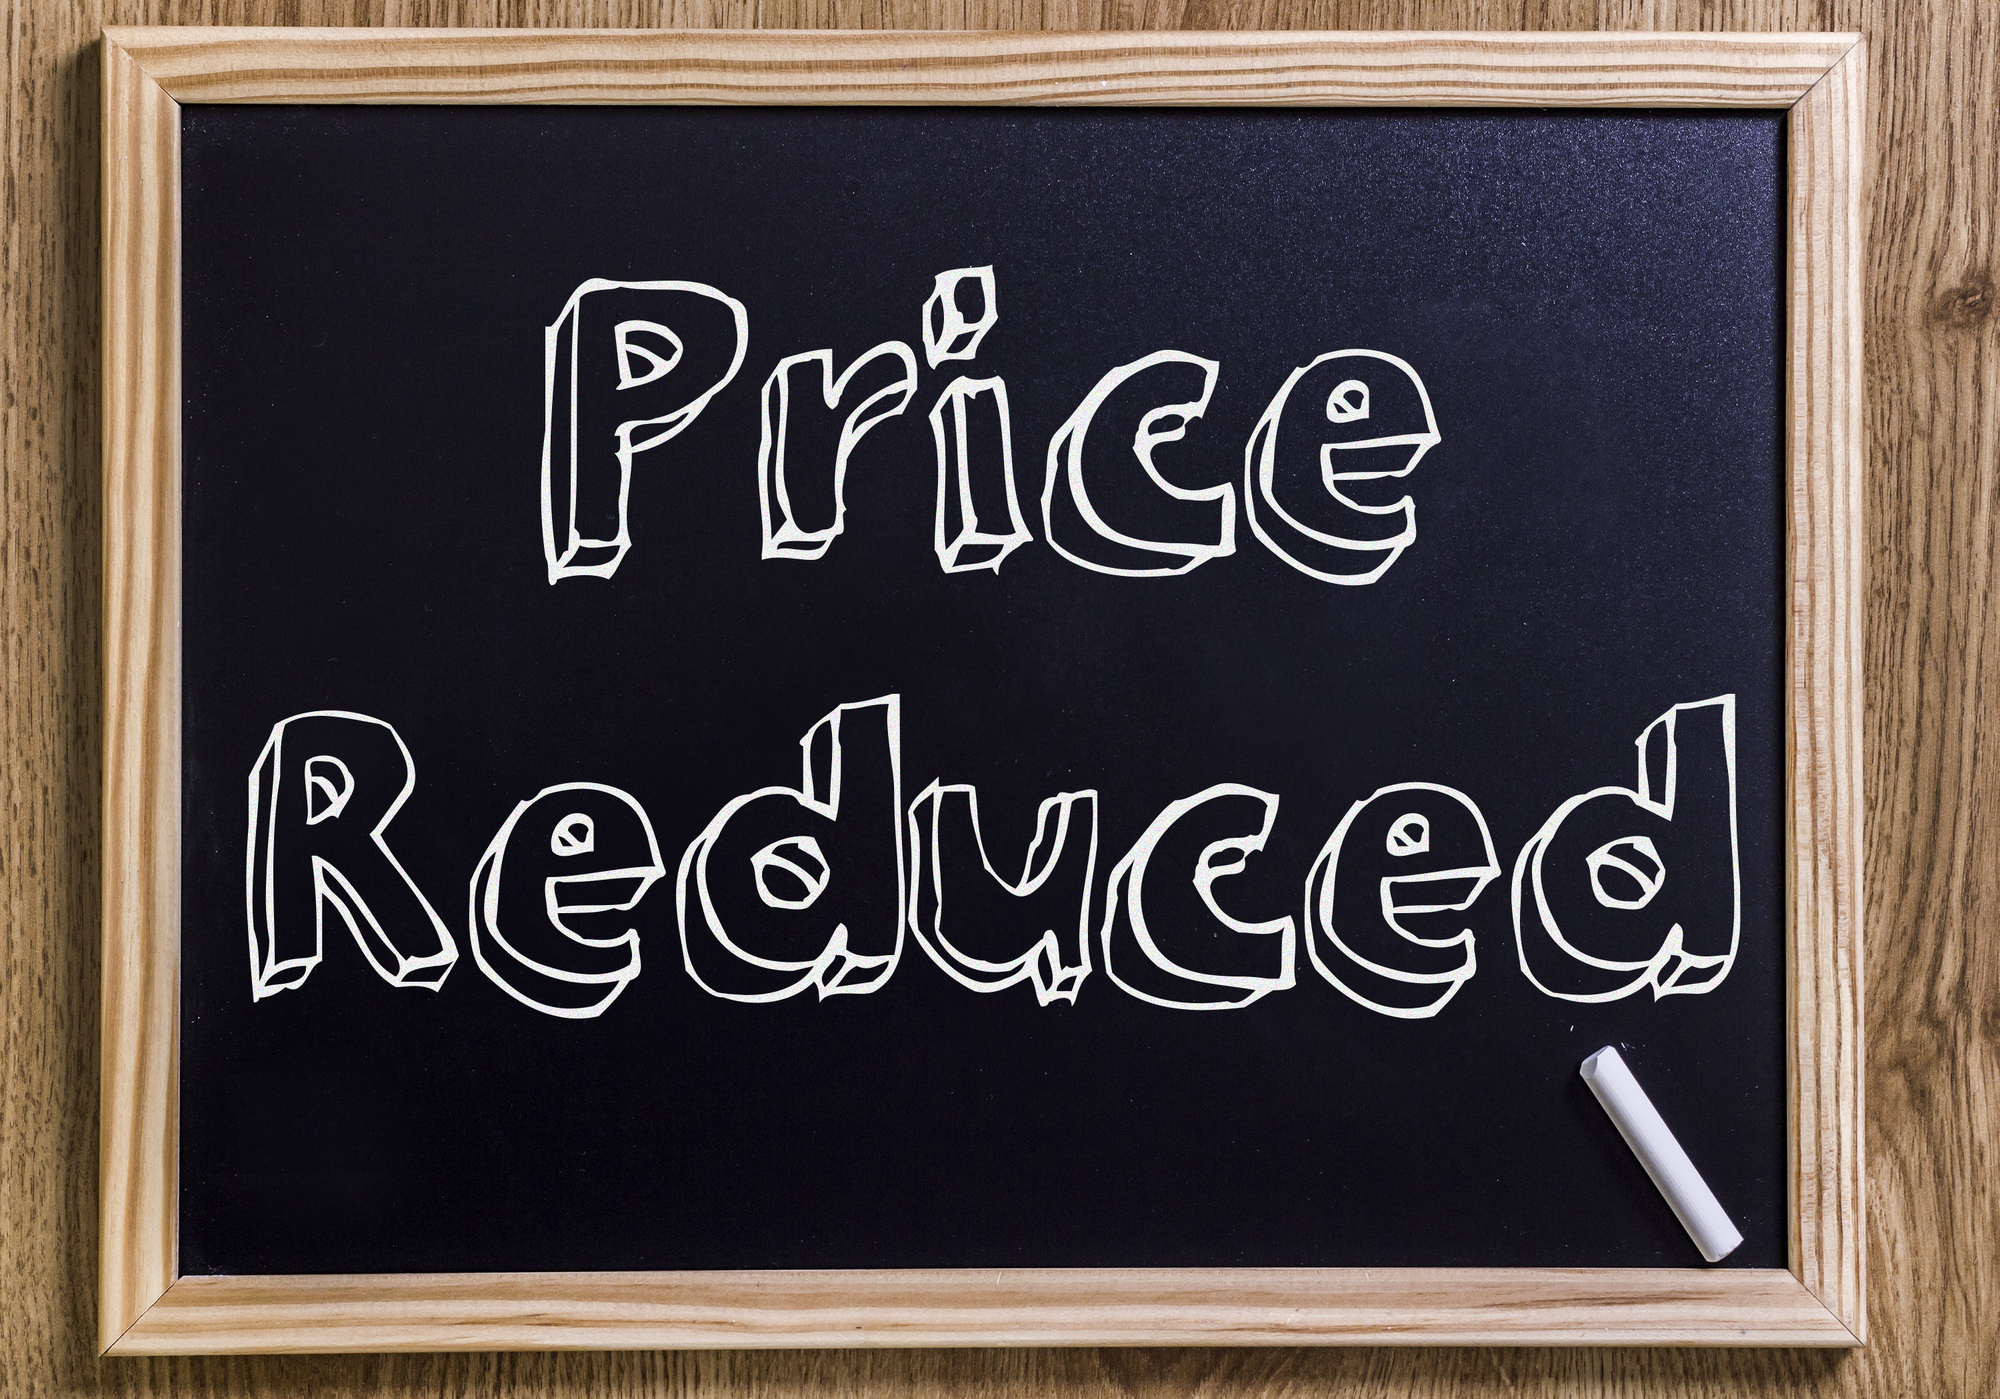 A blackboard with the word price reduced on it.